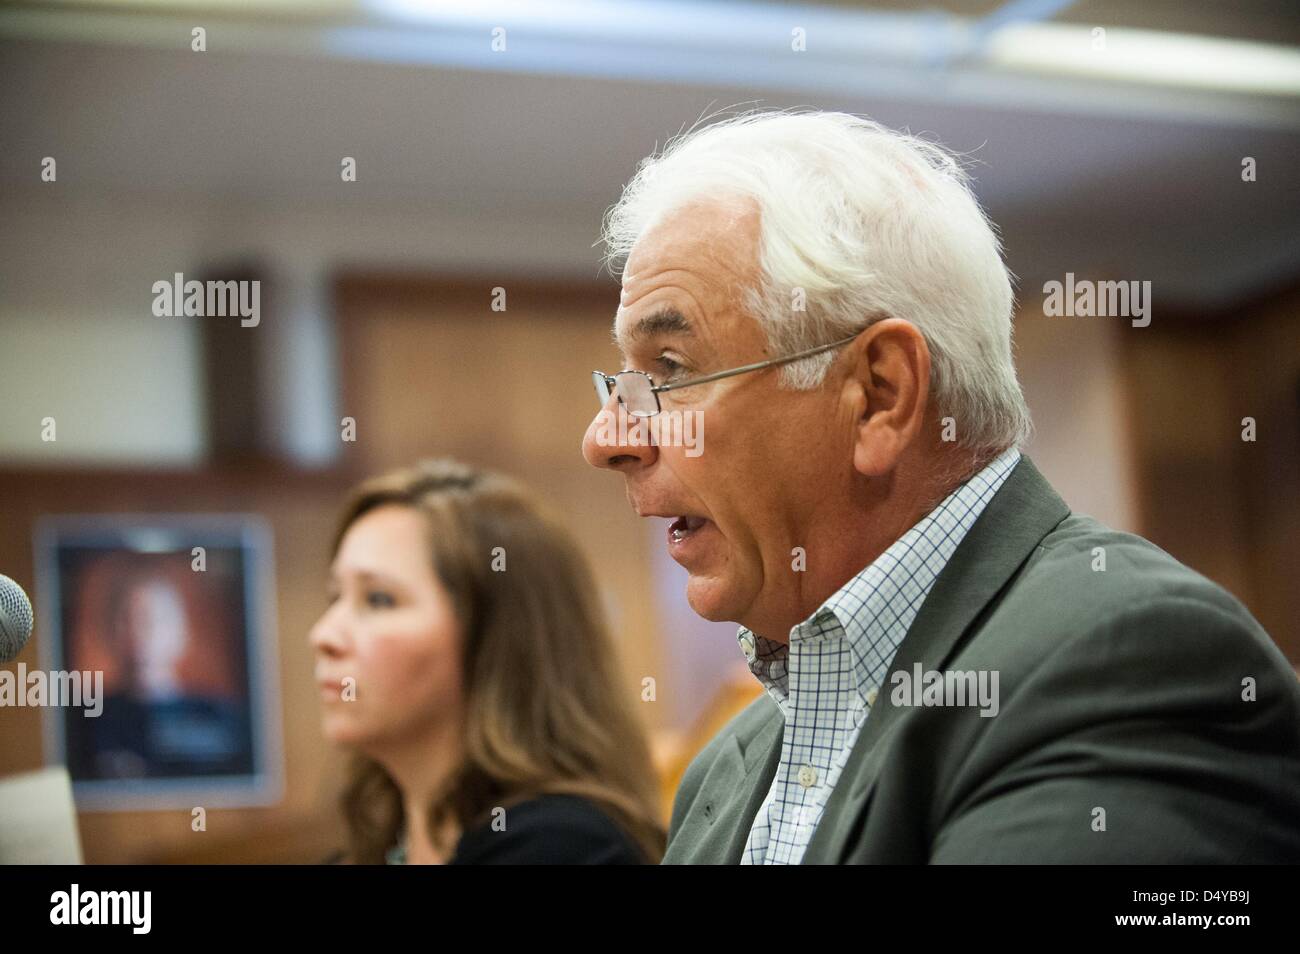 March 20, 2013 - Tucson, Arizona, U.S - Tucson Unified School District board member ADELITA GRIJALVA, left, looks on as TUSD superintendent JOHN PEDICONE, right,  resigned his position at the district's headquarters in Tucson, Ariz., denying that he was forced out by the board.  ''This is not a matter of someone fleeing a place,'' Pedicone said.  Since taking the position in 2010, Pedicone has faced criticism from the community and civil rights groups over his handling of the state's decision to end the district's embattled Mexican-American Studies program.  The district has seen five superint Stock Photo